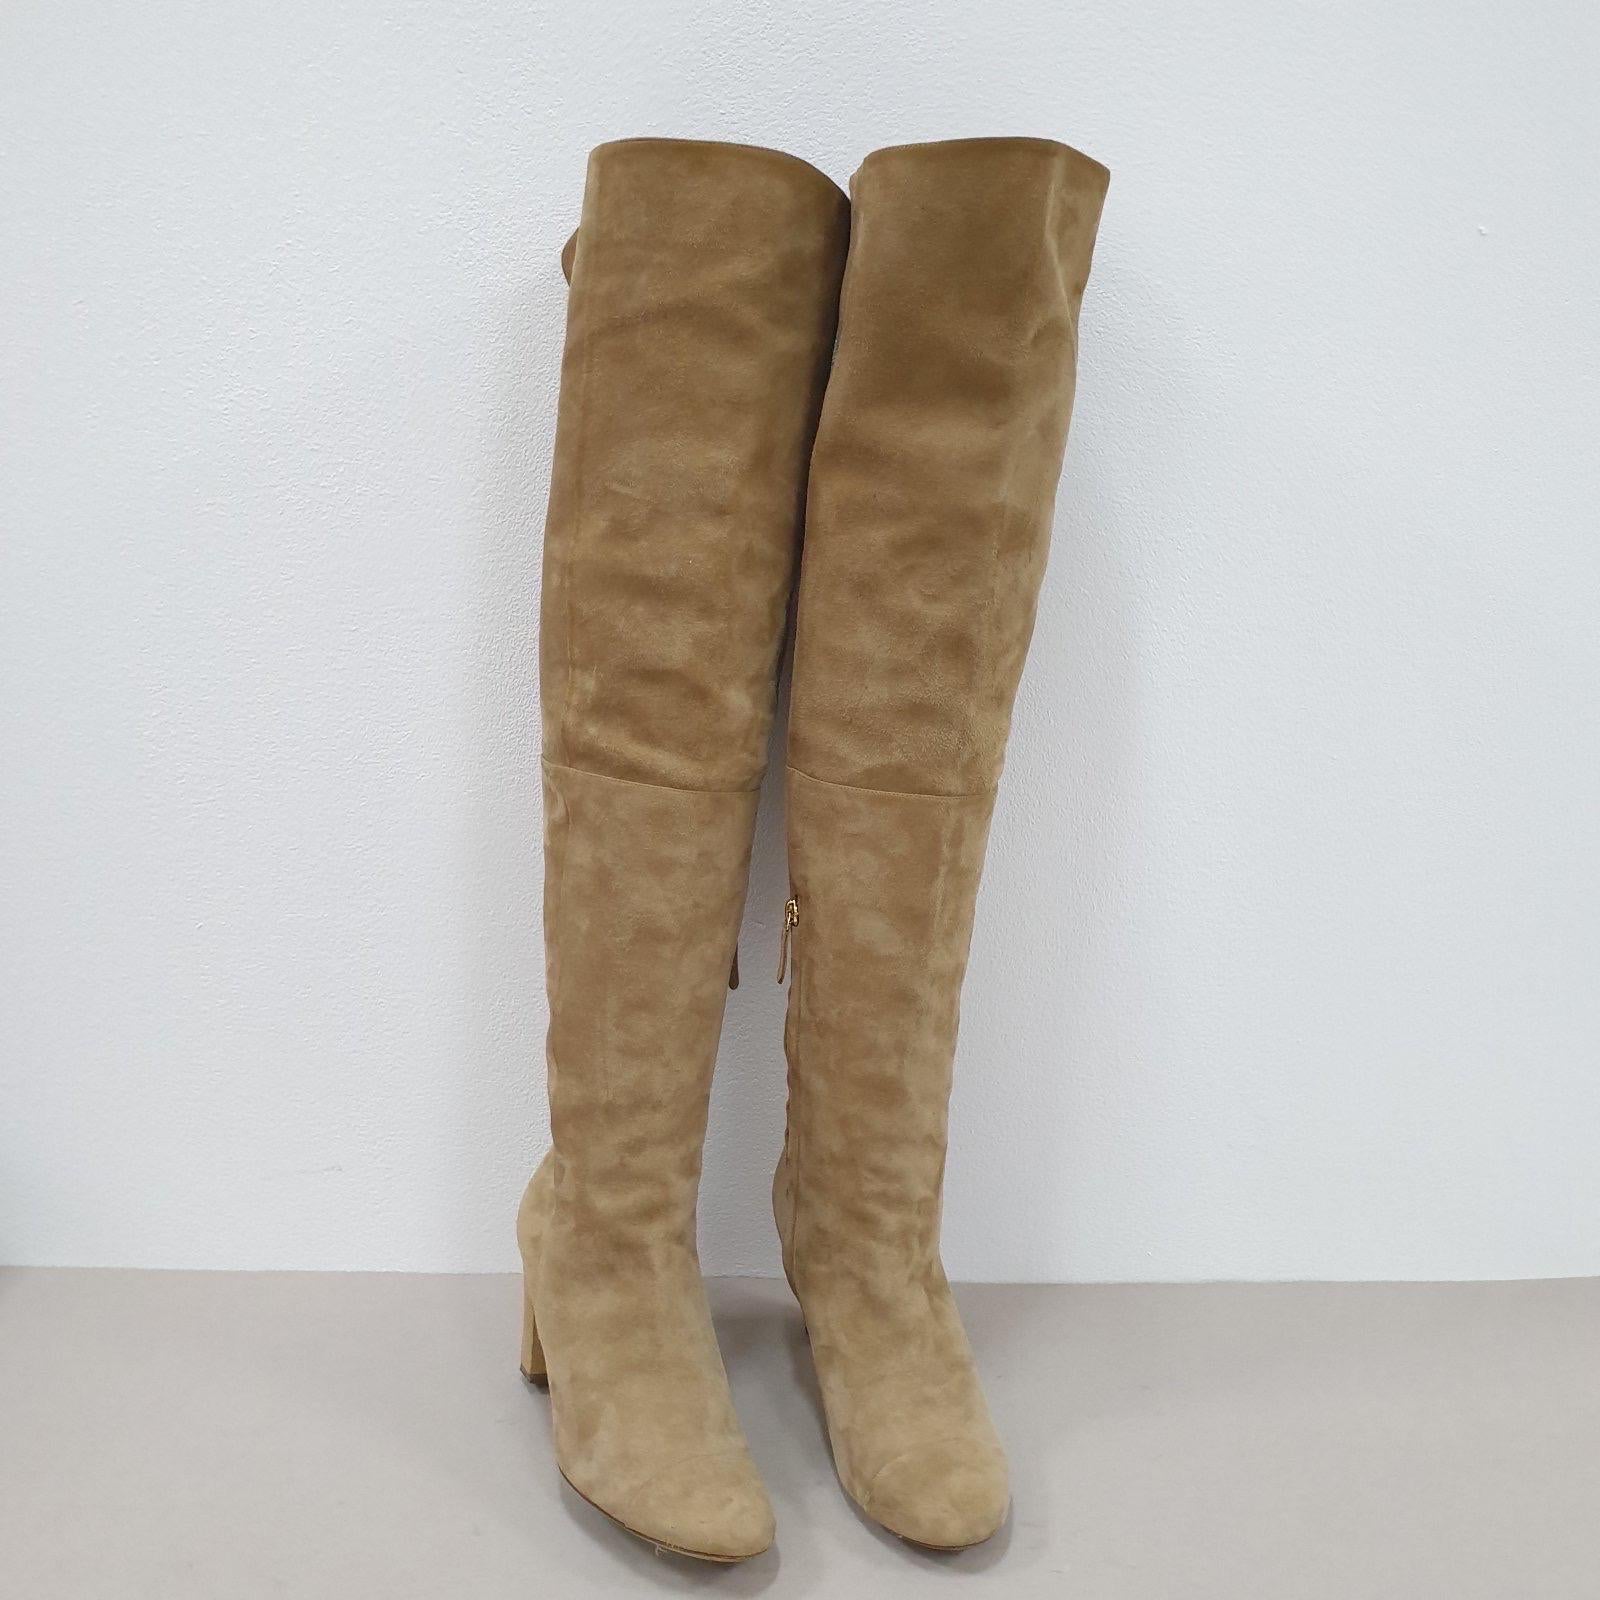 CHANEL beige suede over the knee boots from the 13B collection,  
Beige suede with cap toe detail; covered hexagonal heels. 
Pull on style with lower inner half zip; large interlocking CC embroidery at the inner toplines.
Sz.38
Very good